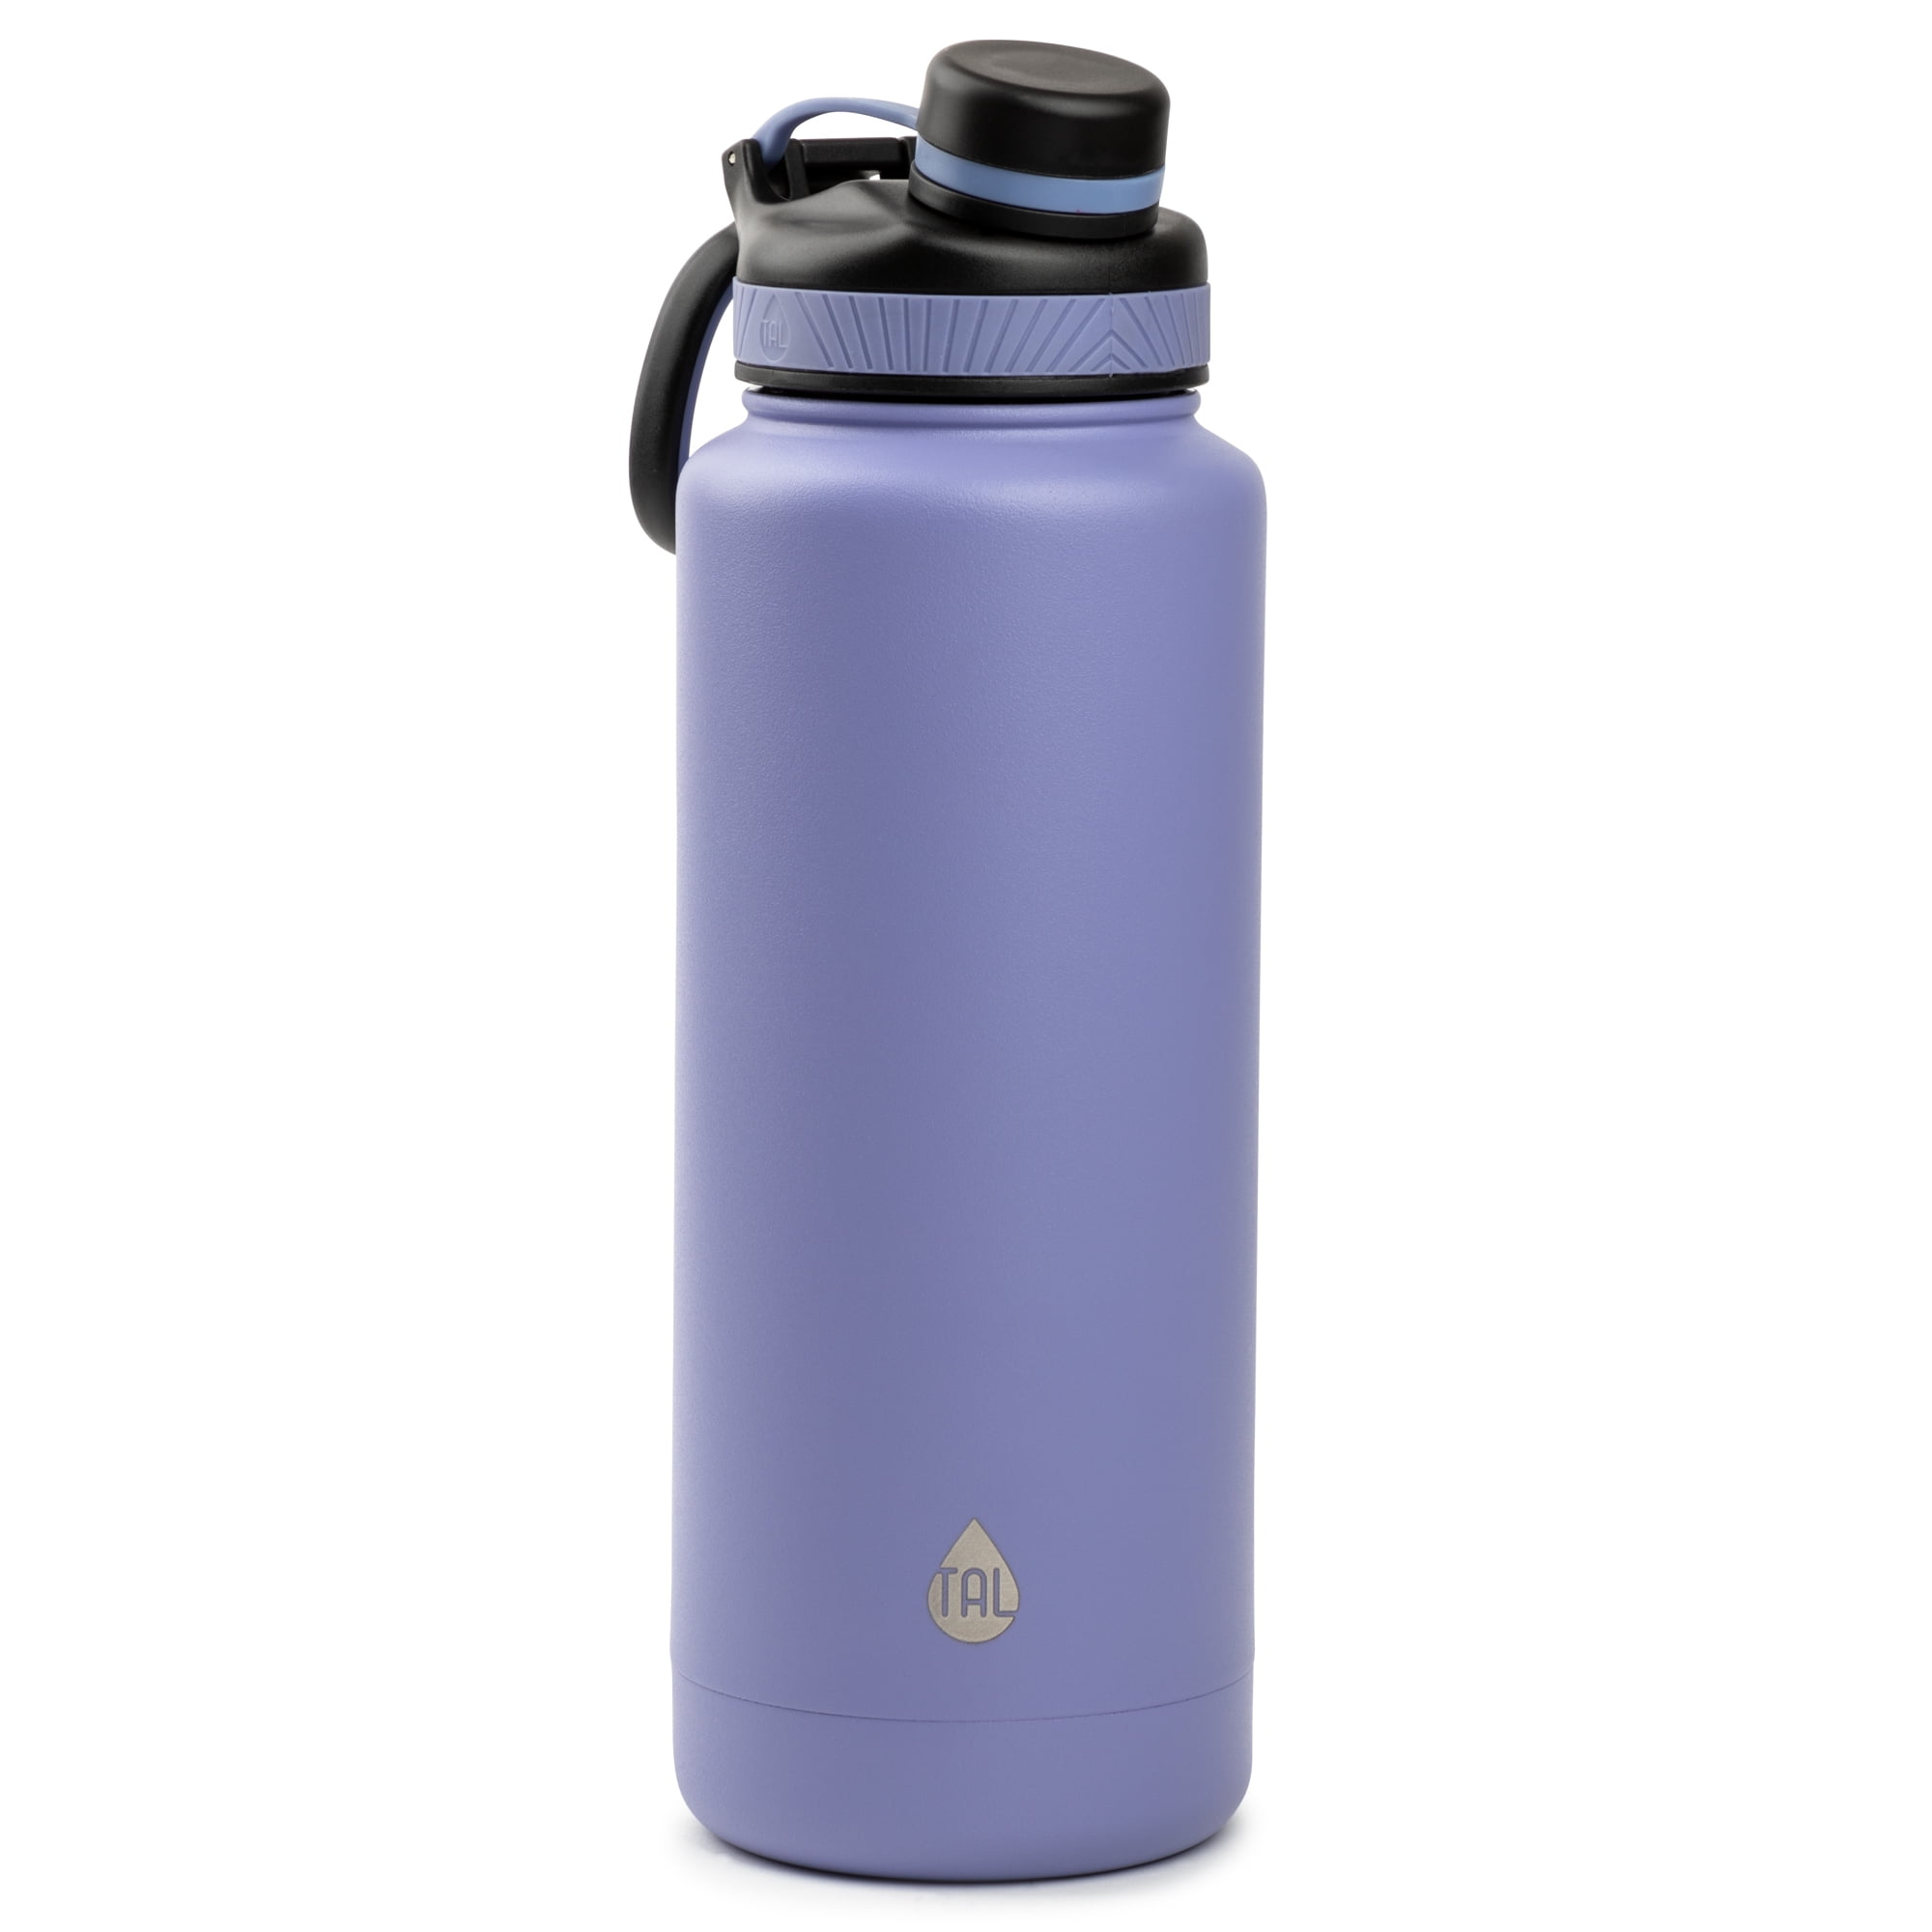 Details about   TAL Ranger 12 oz Stainless Steel Double Wall Vacuum Insulated Water Bottle 